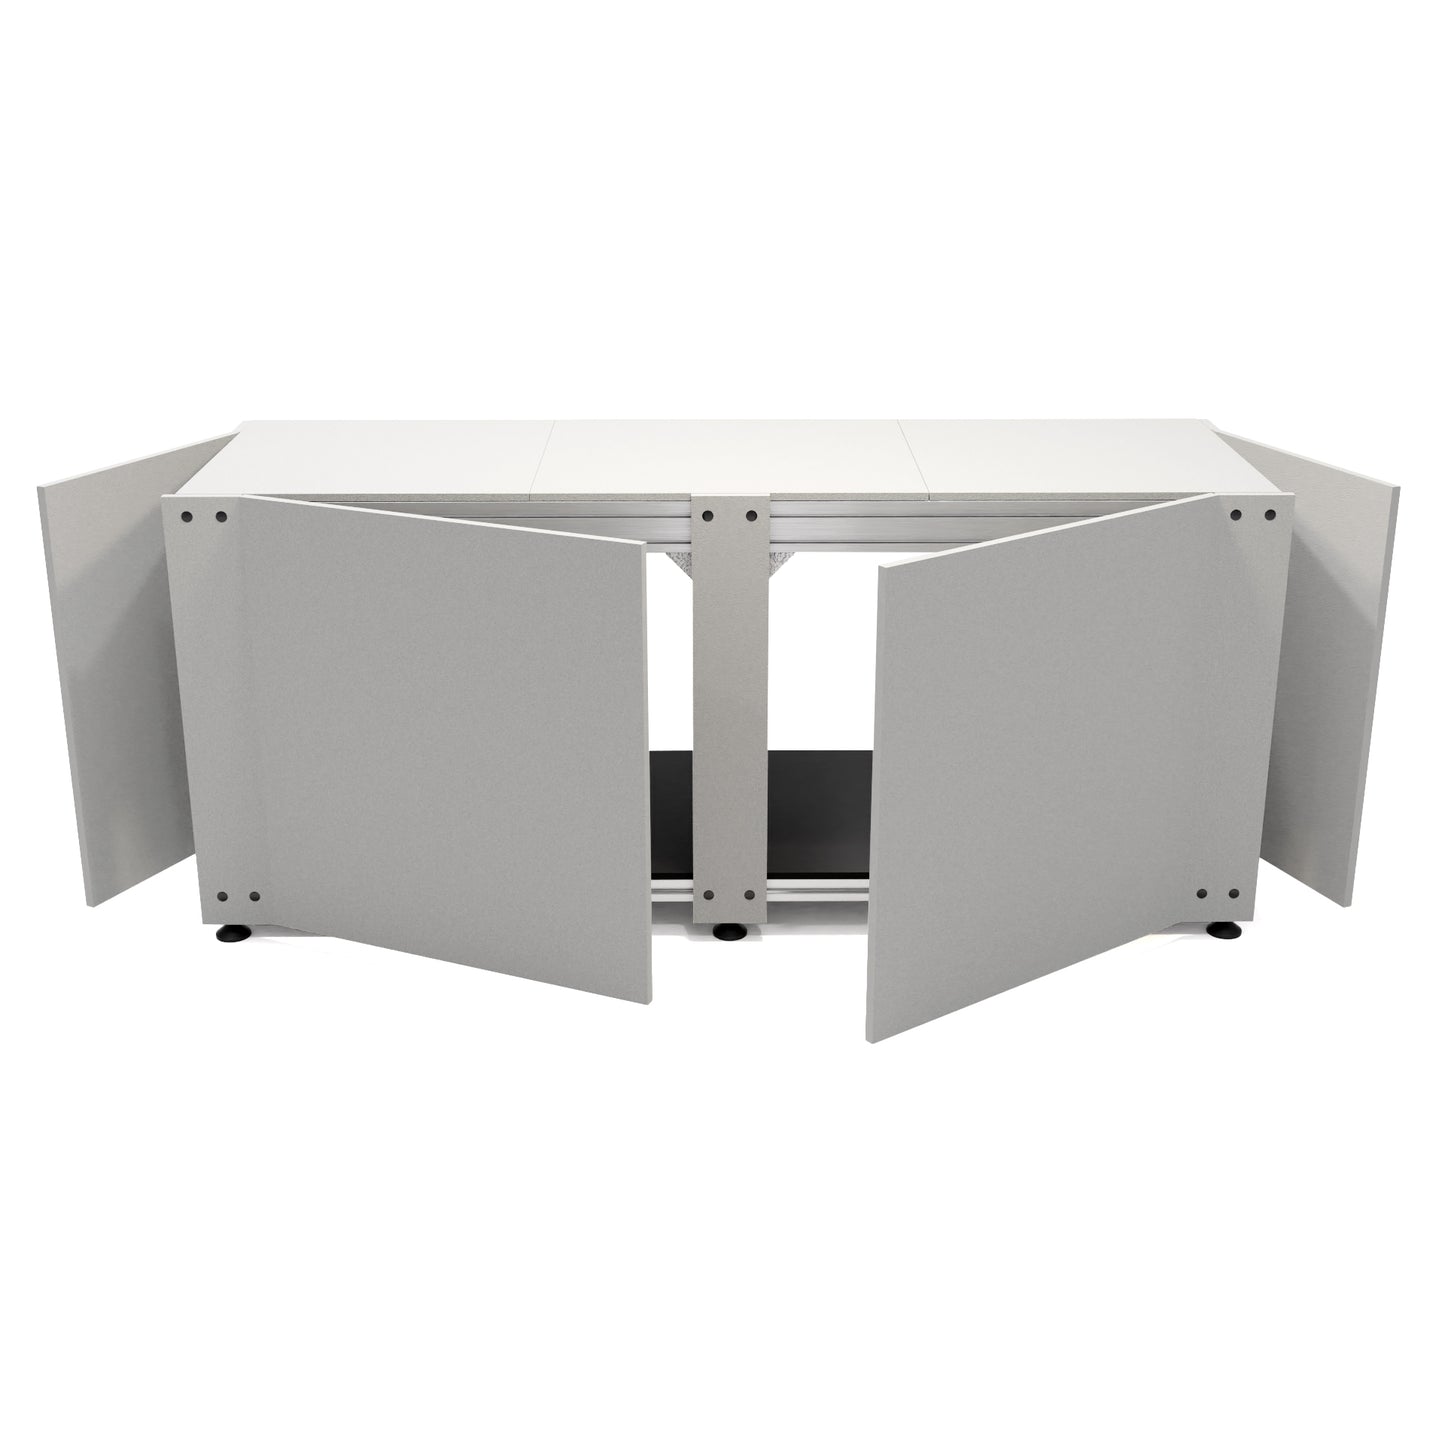 ReefPoint® 225 Saltwater Acrylic Aquarium and Aluminum Stand Center OF 72x24x30